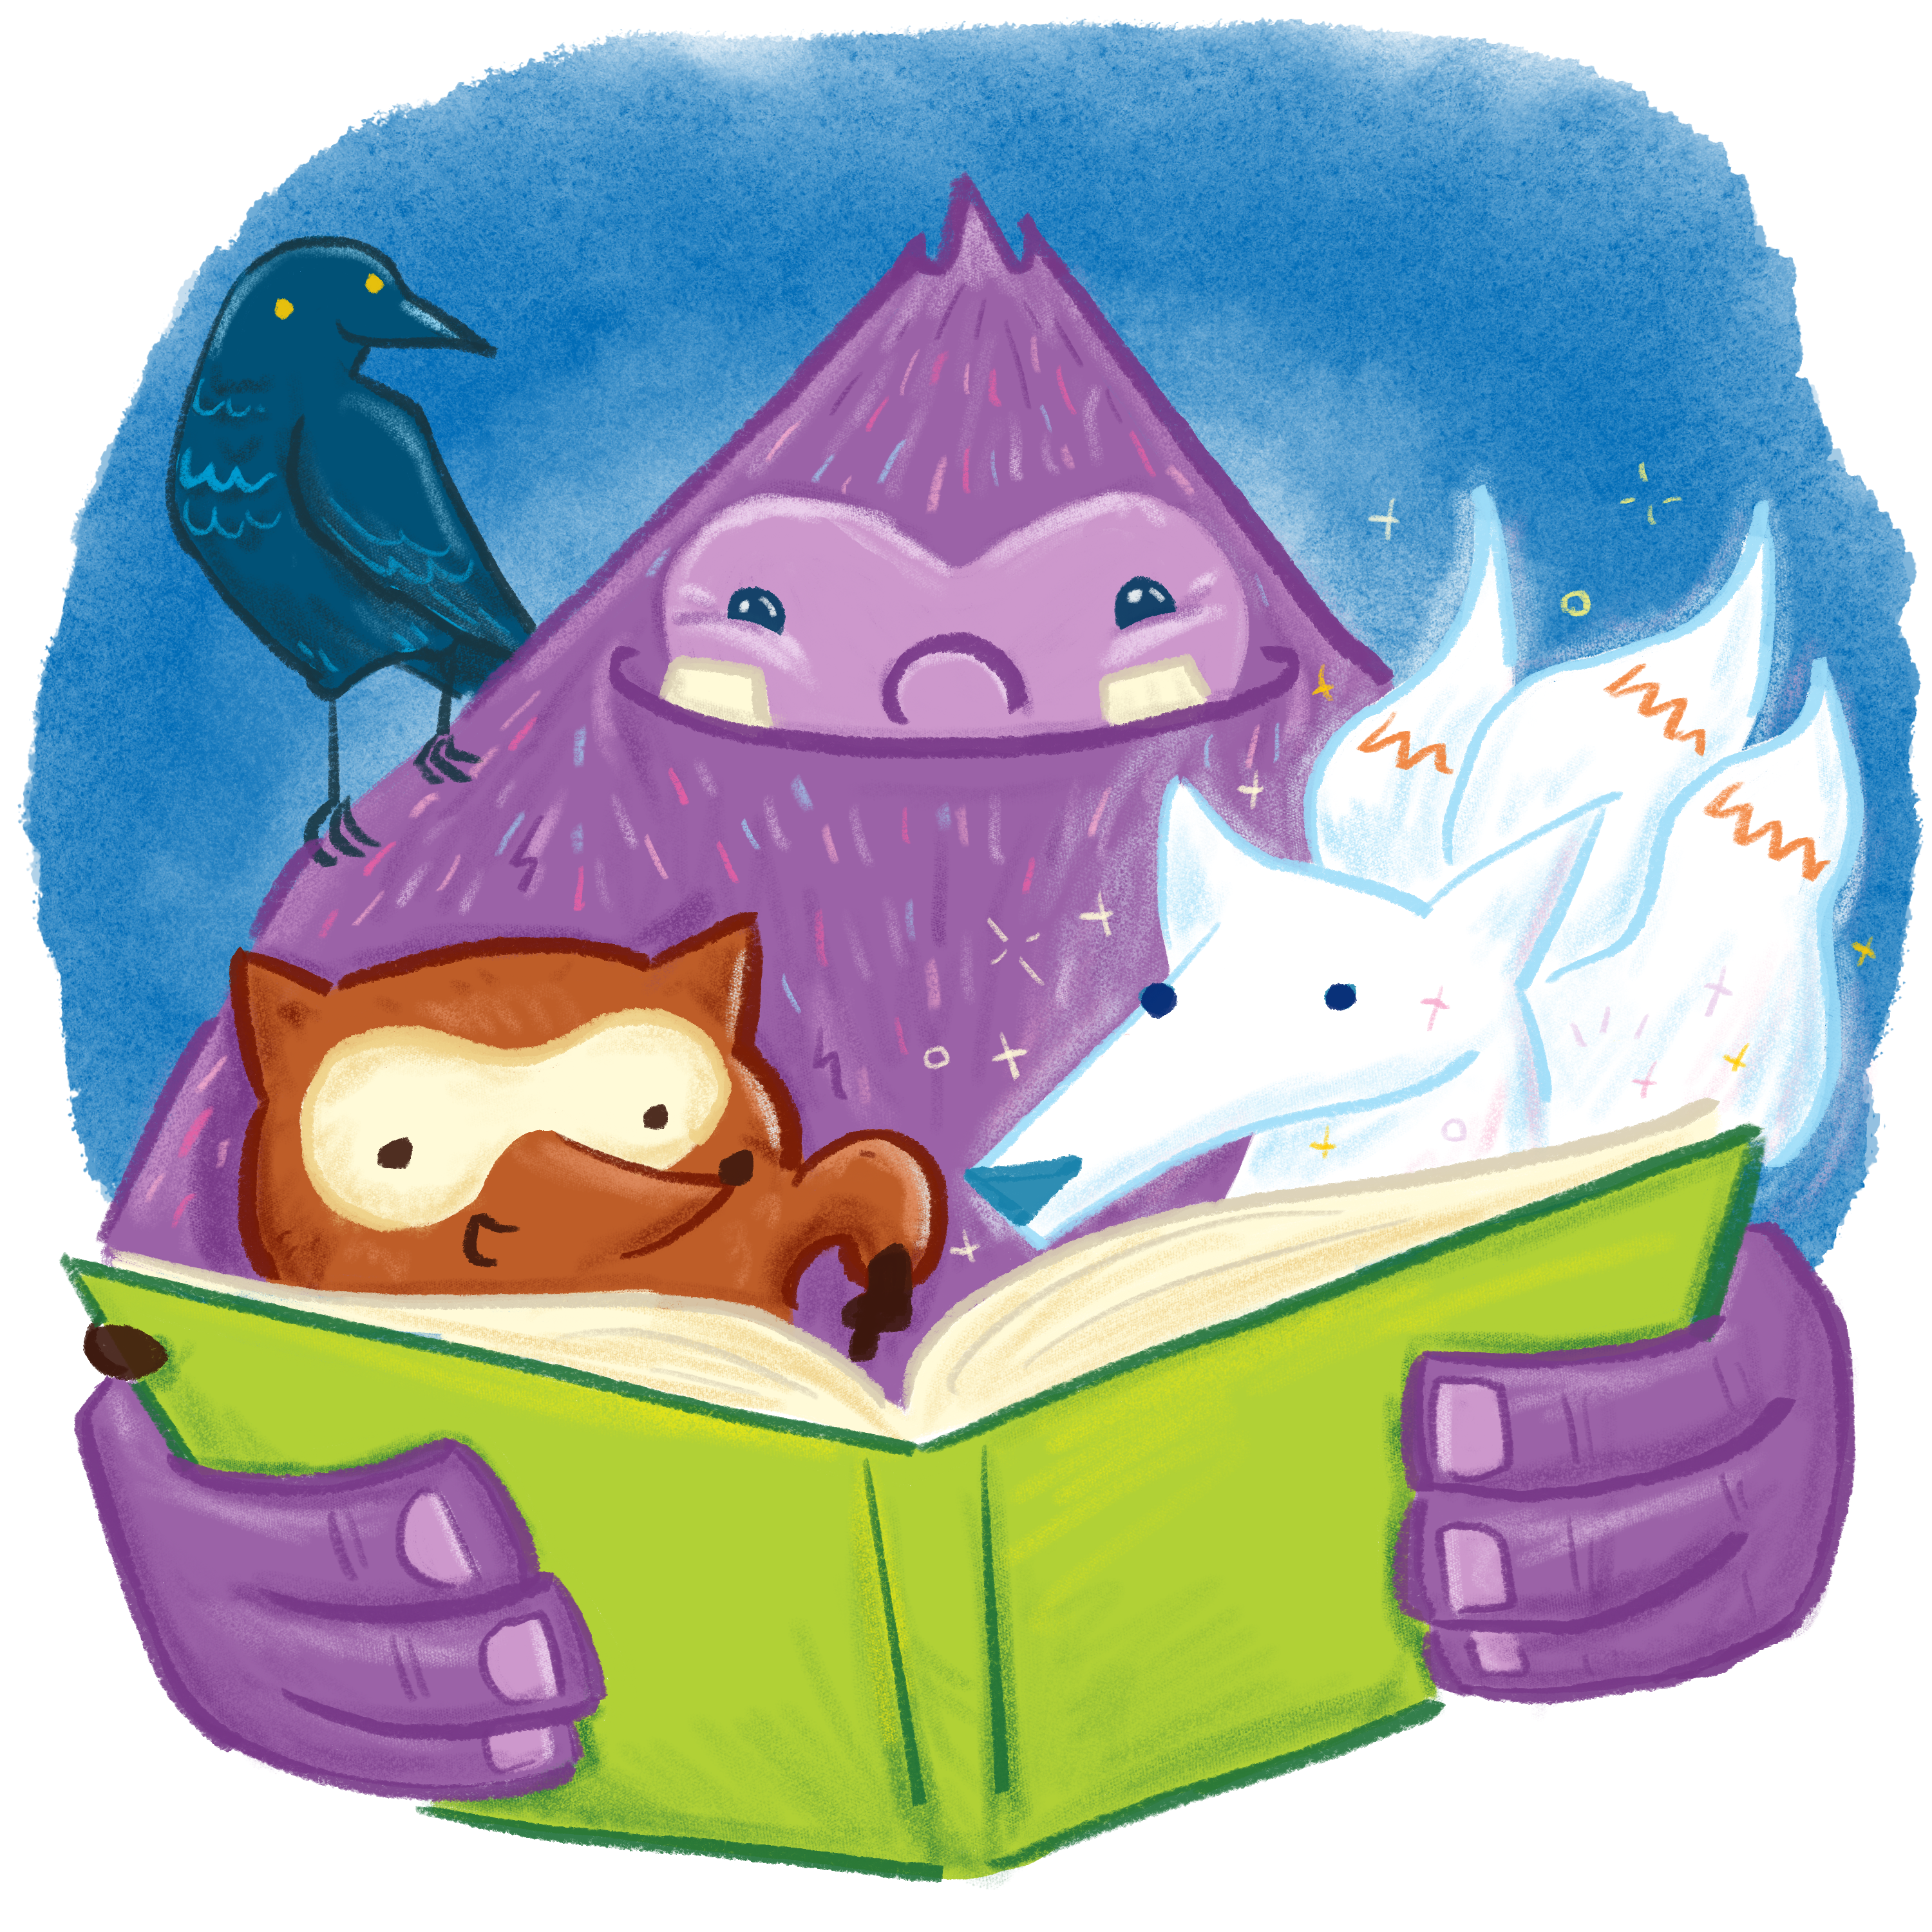 monsters reading a book together